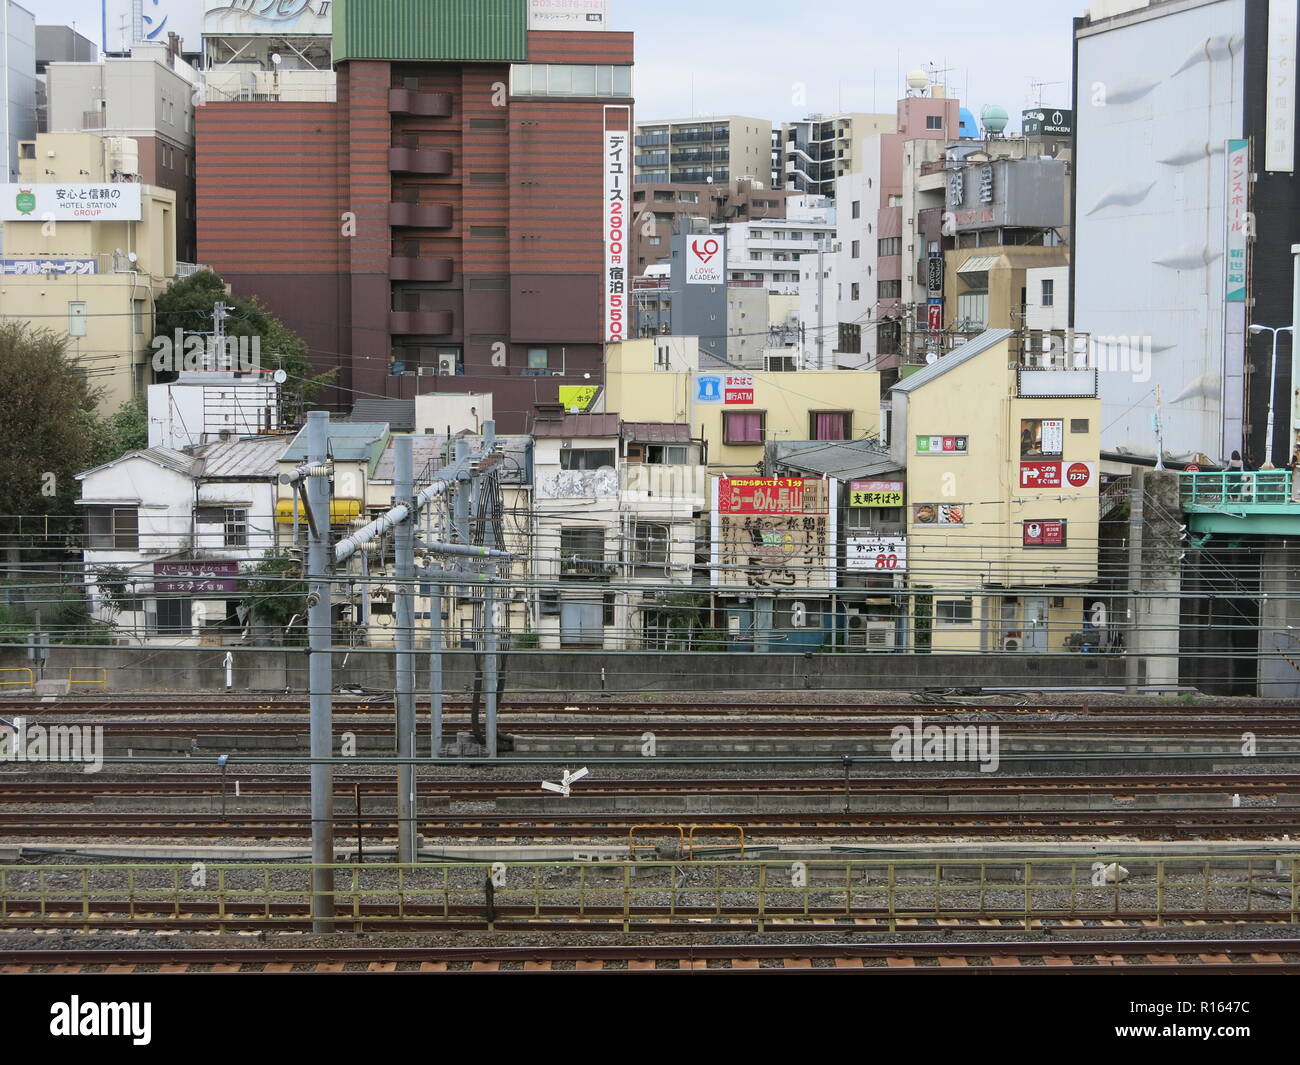 A view of central Tokyo from the window of a train on the Yamanote Line (JR East), Tokyo to Meguro: high density of buildings and railtracks; Japan Stock Photo